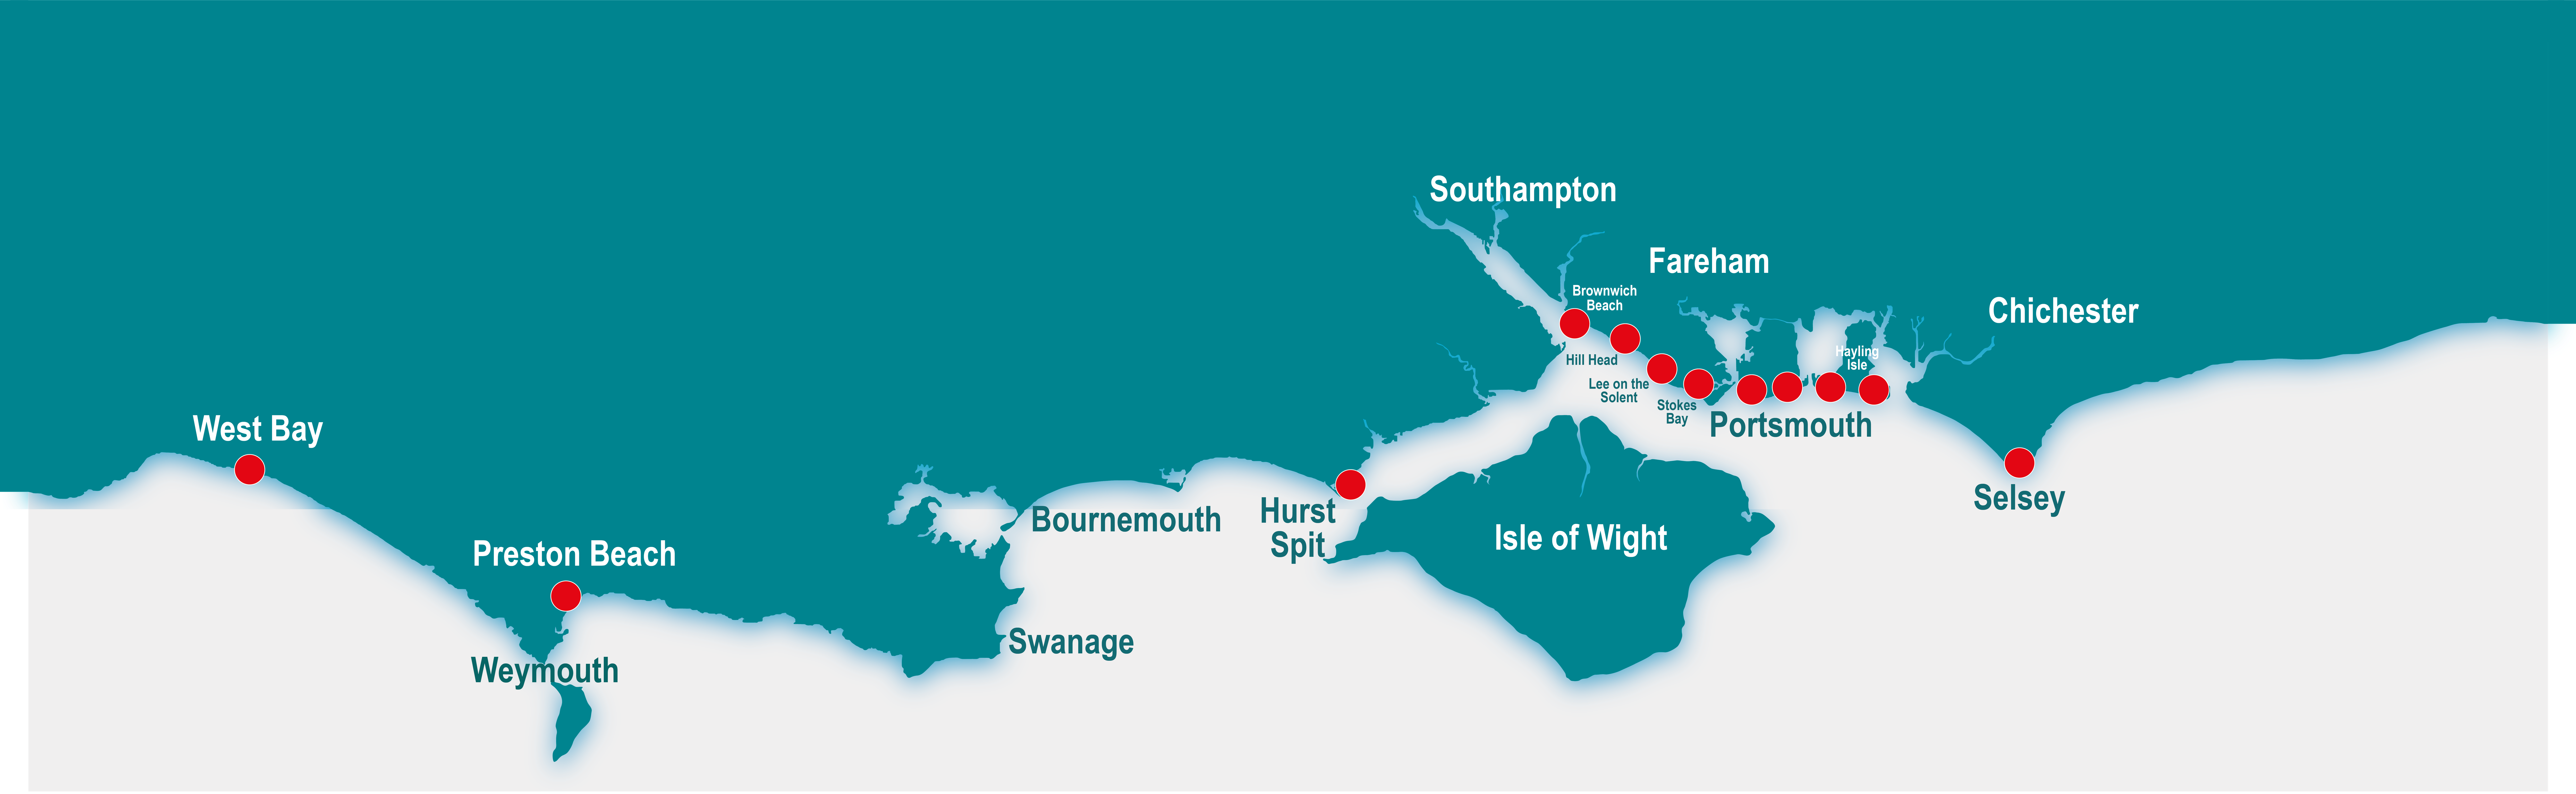 Map showing future tracer pebble deployments along the south coast of England